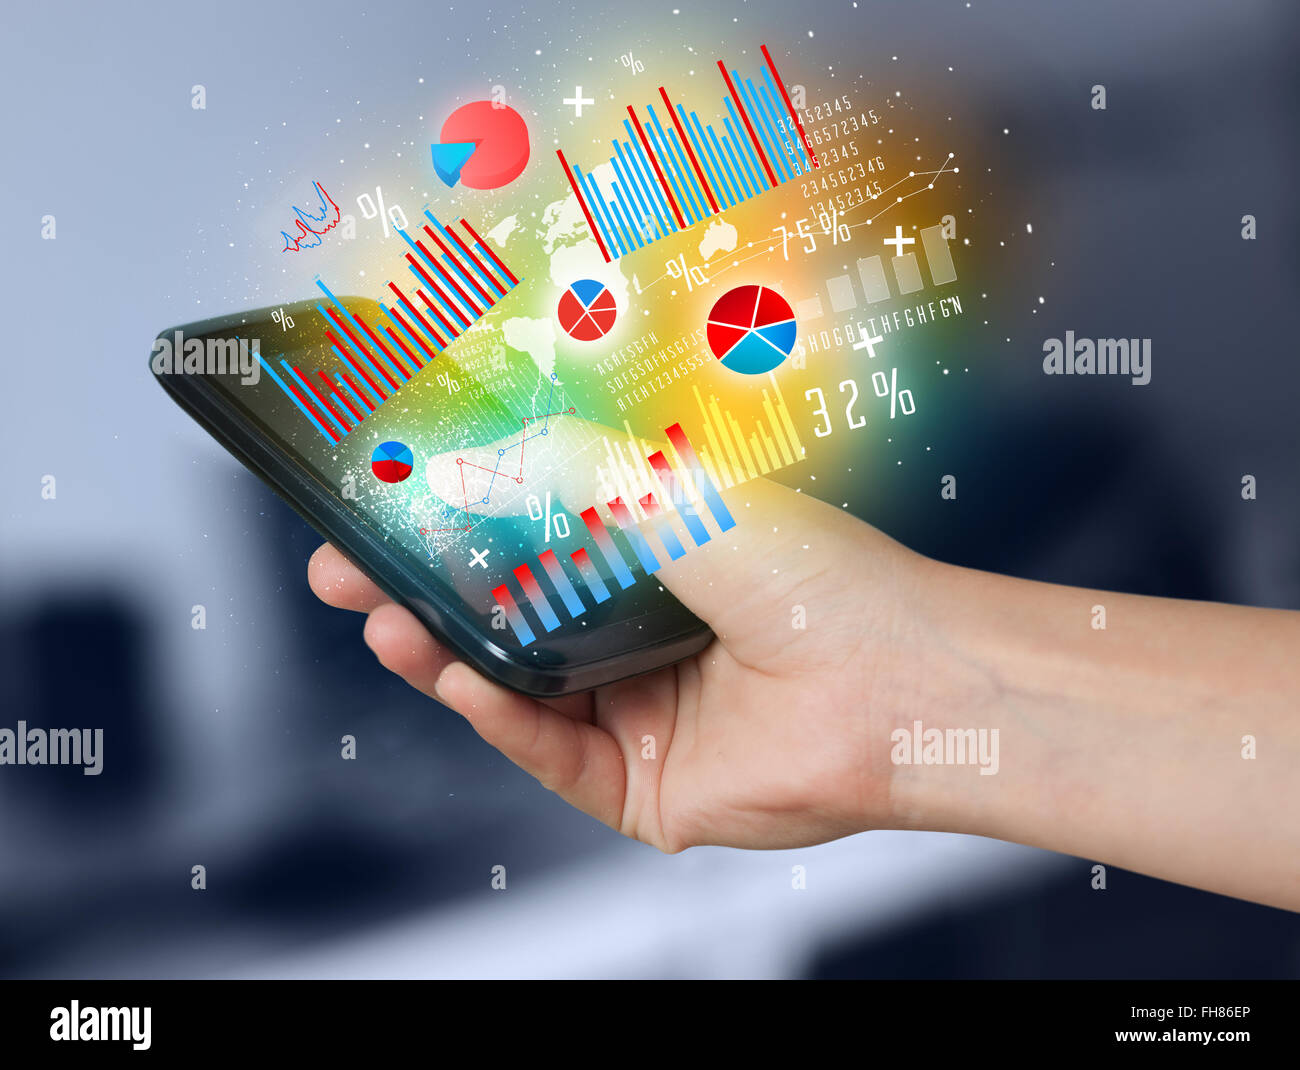 Business man holding smartphone with chart symbols Stock Photo